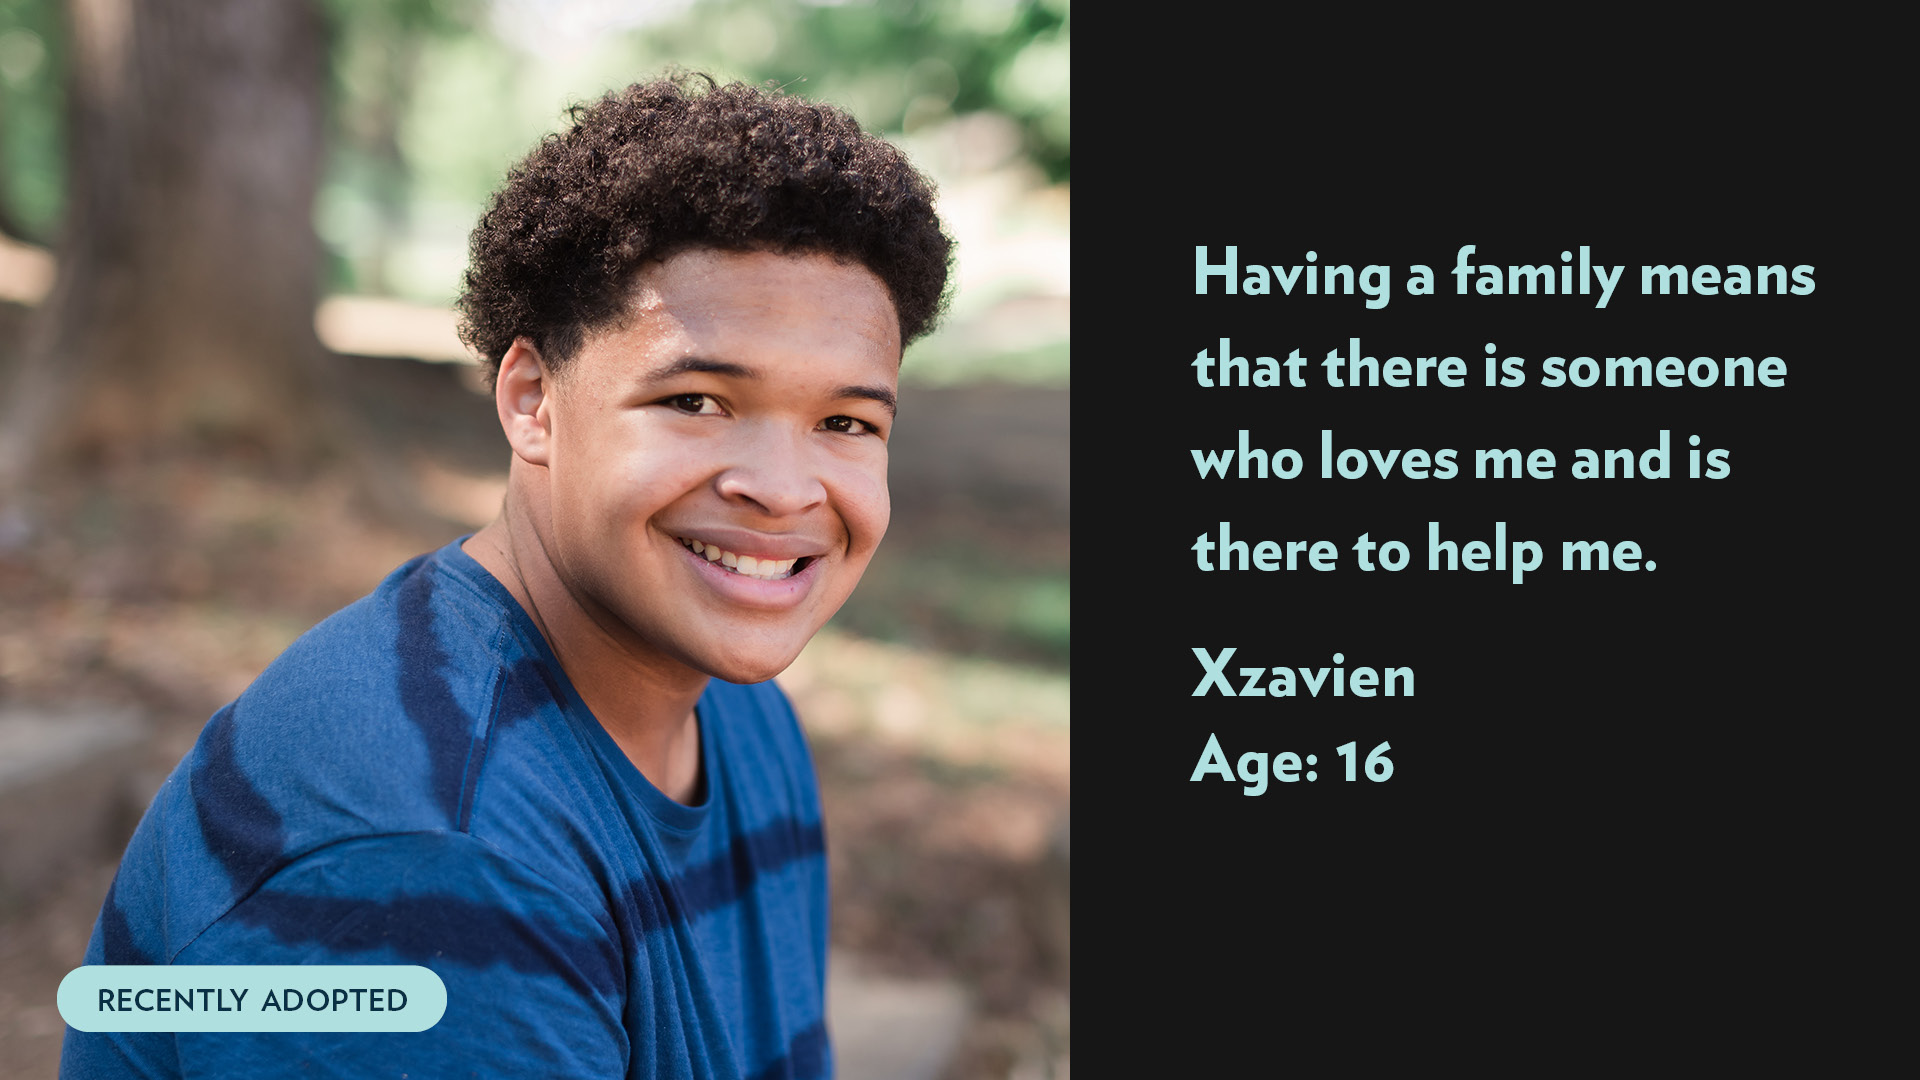 Xzavien, age 16. Having a family means that there is someone who loves me and is there to help me. Recently adopted.